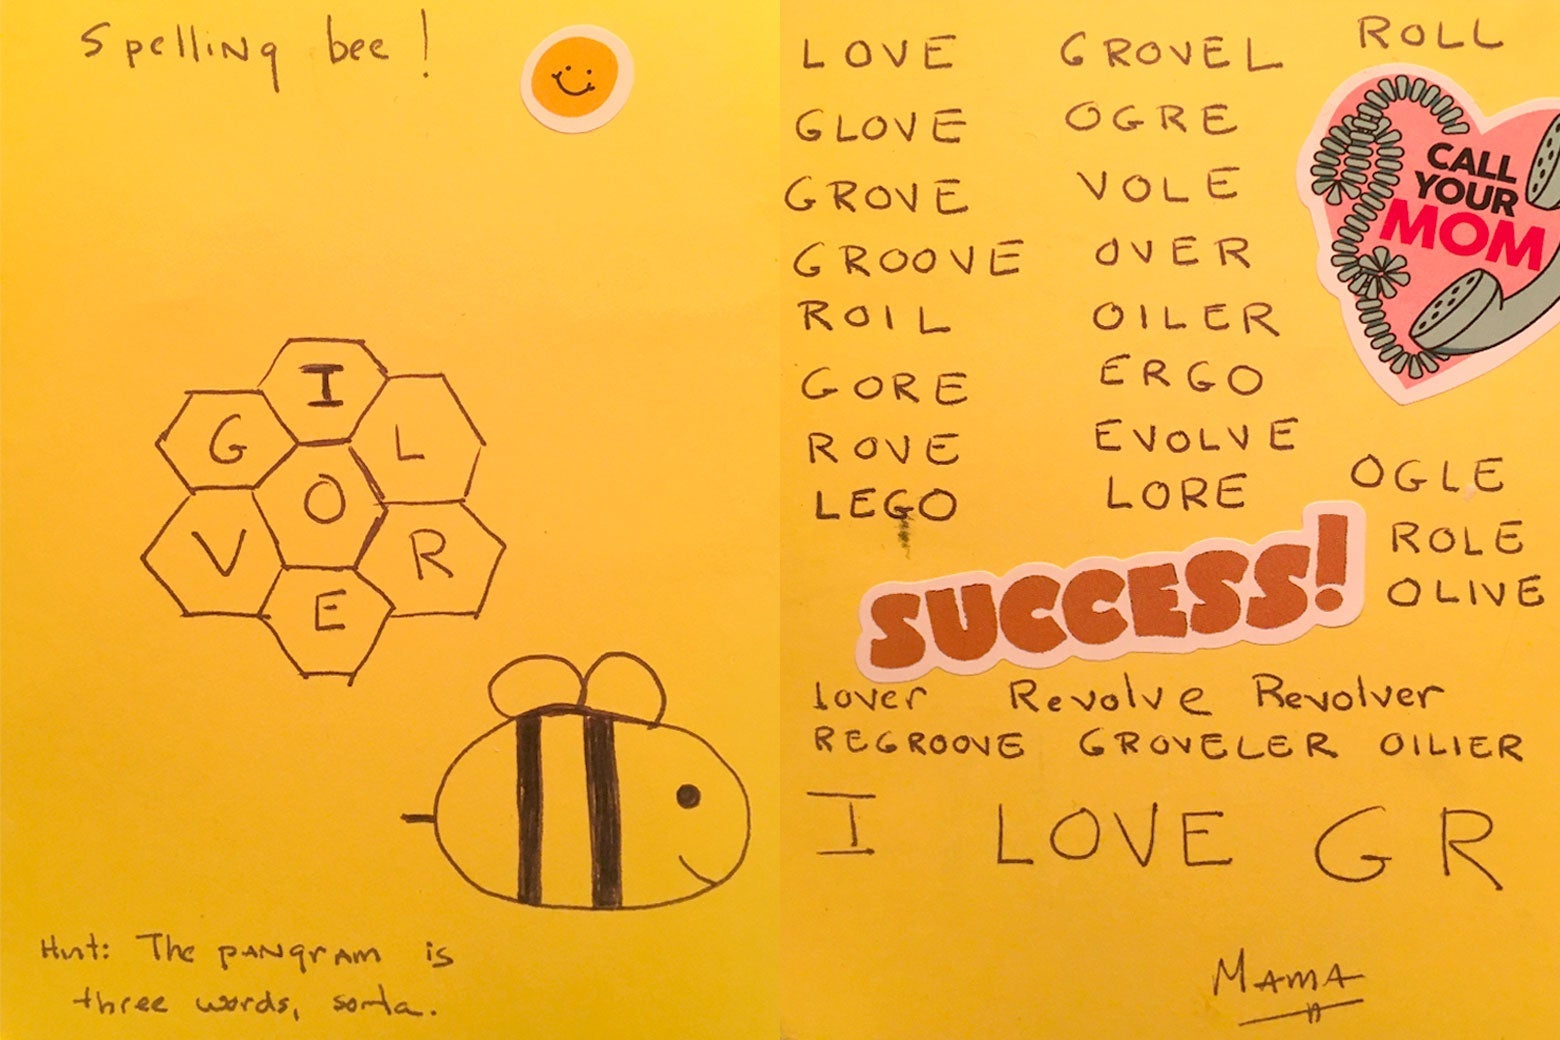 A homemade version of the NYT Spelling Bee, drawn on paper with the shapes and the words, along with a bee.